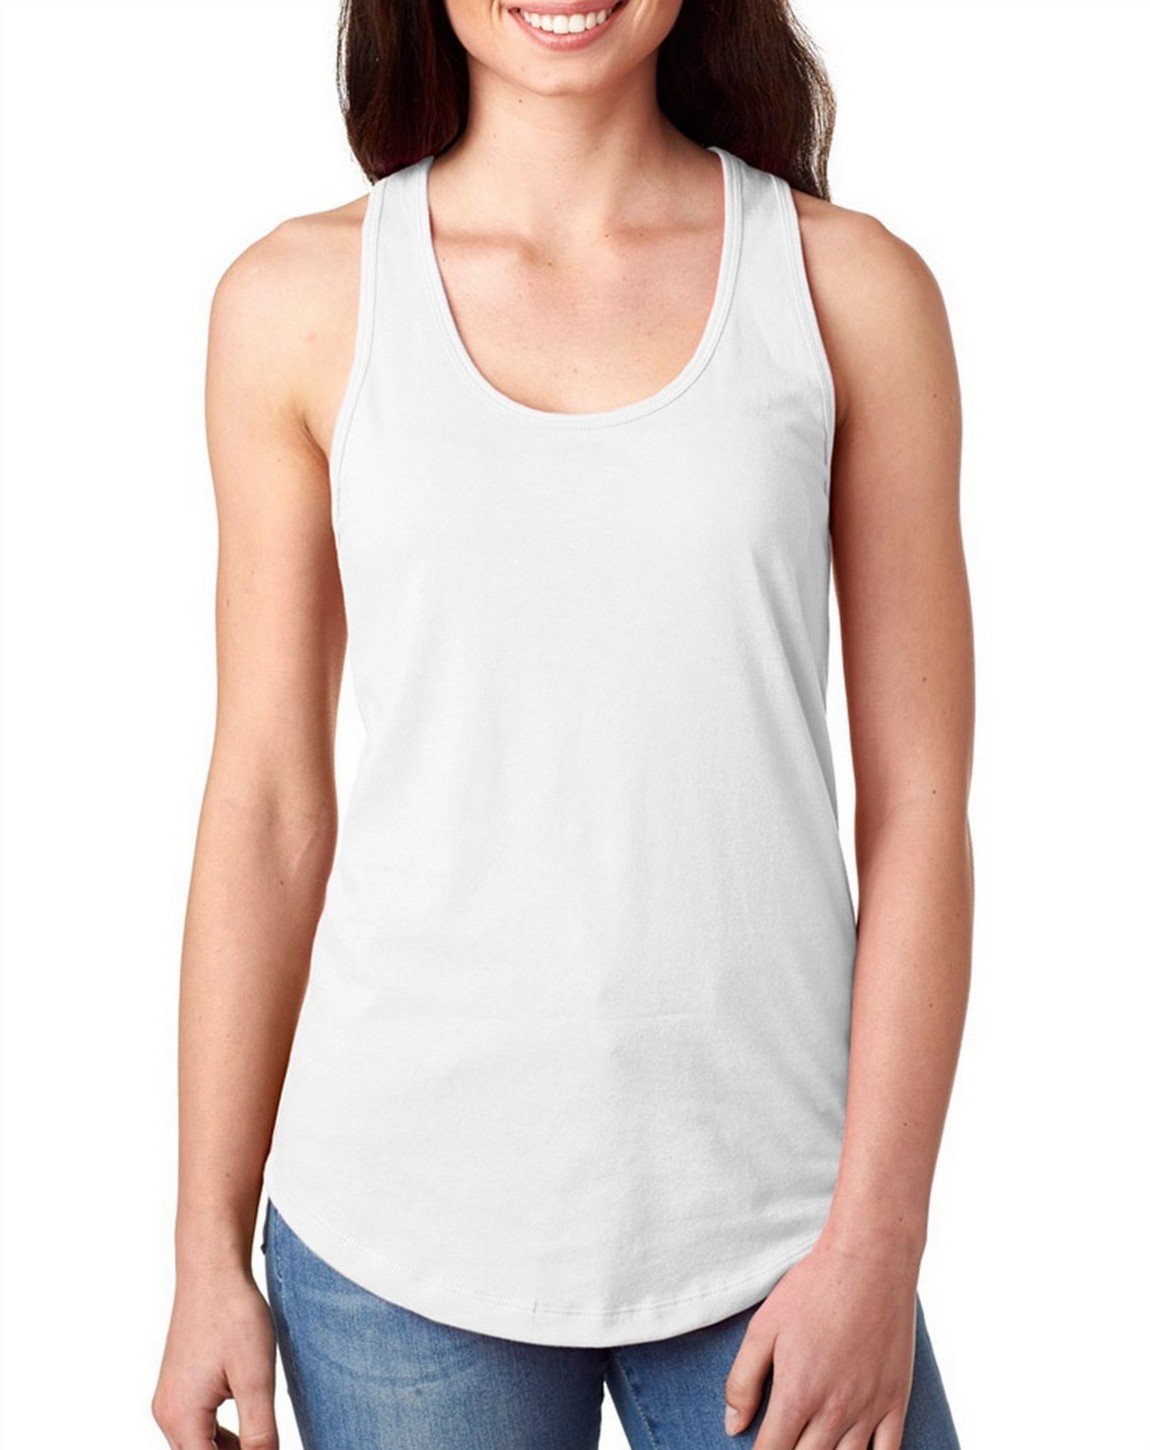 Next Level Ideal Racerback Tank White XX-Large (Pack of 5)